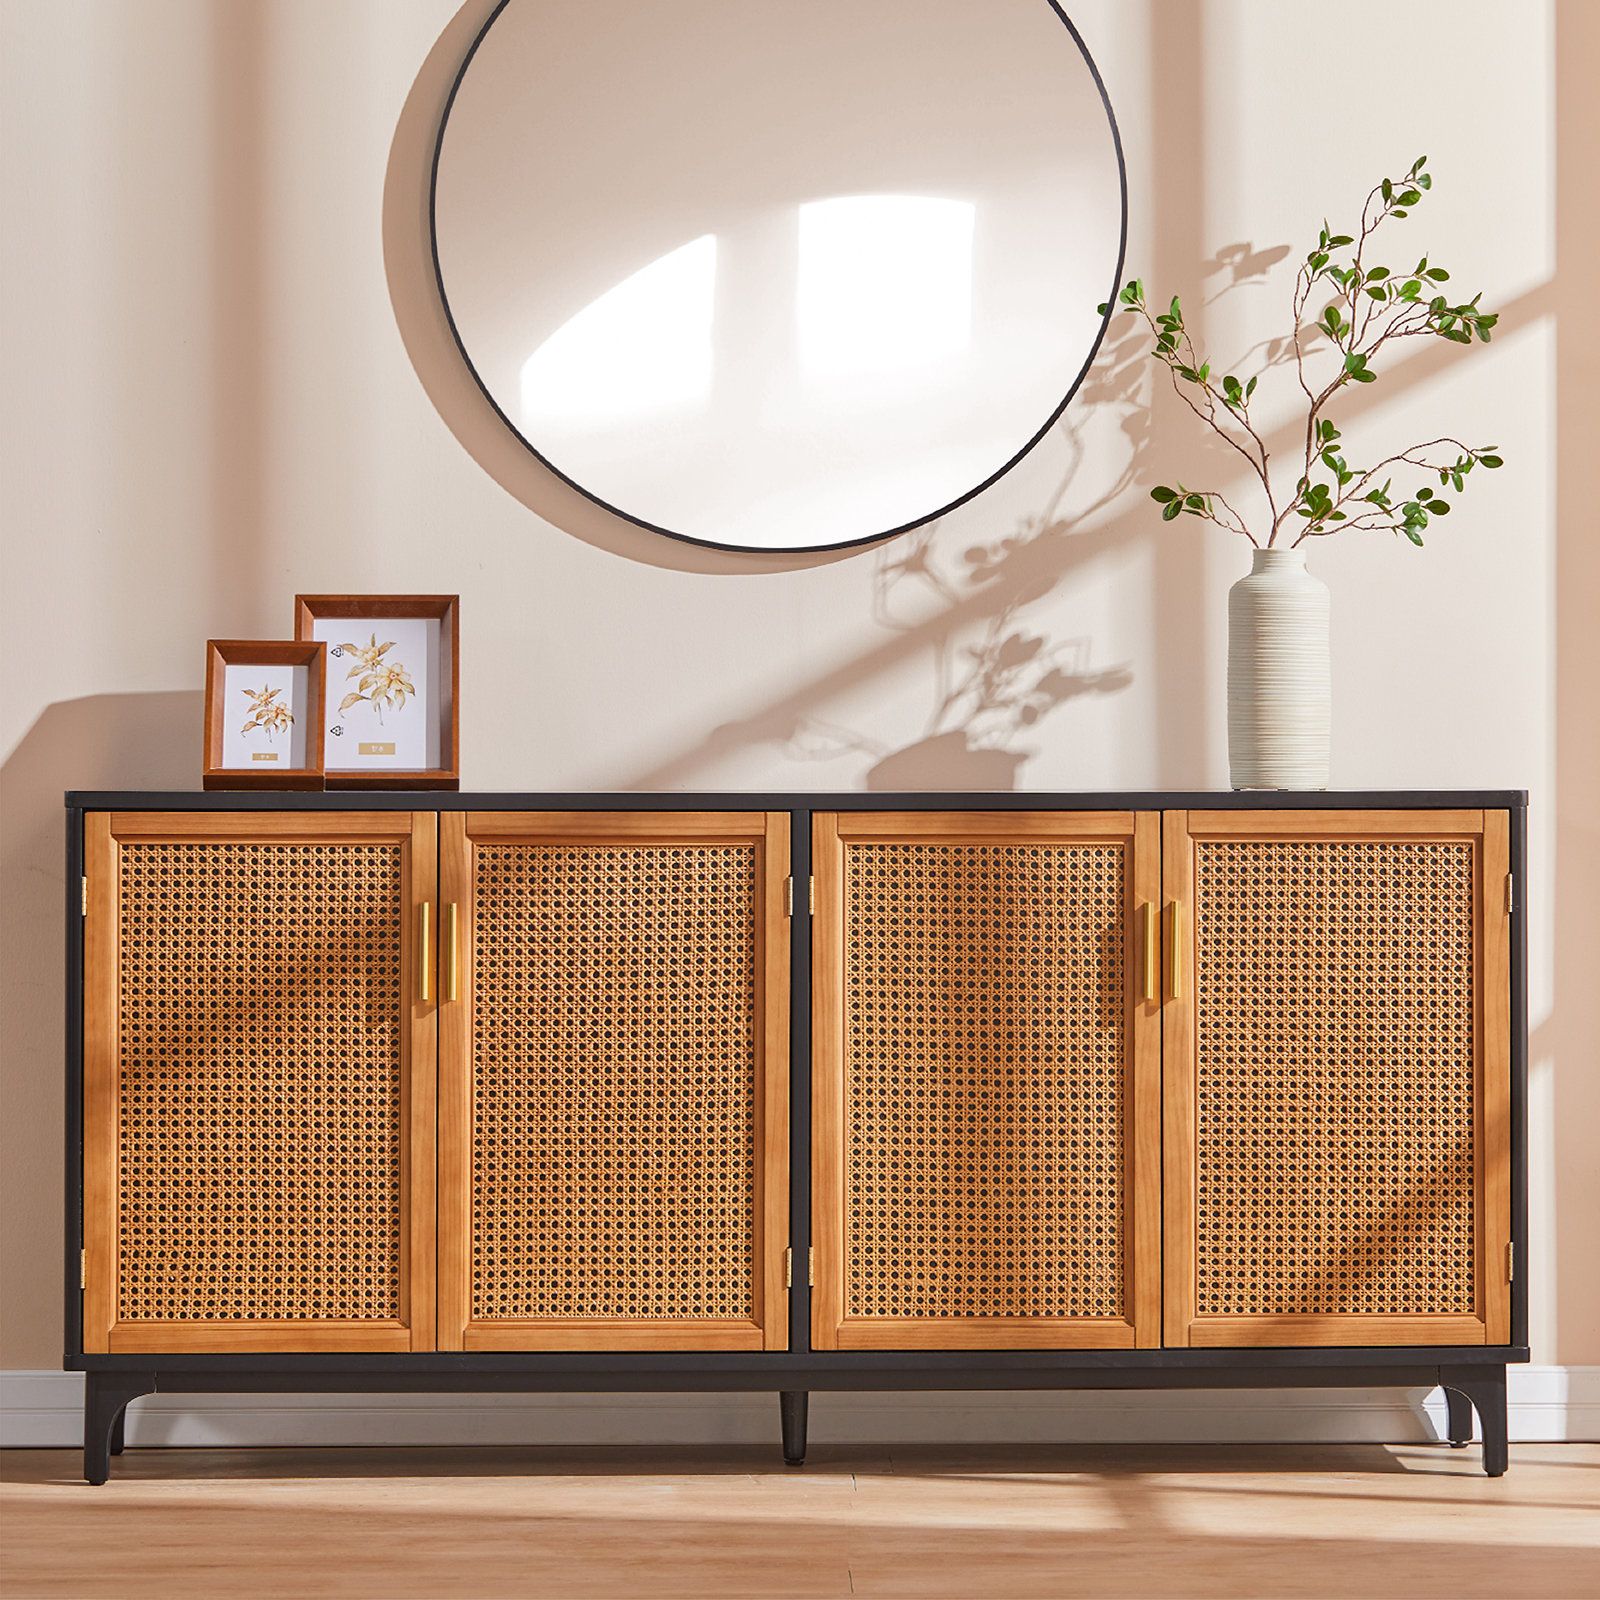 Bay Isle Home Hiawatha Sideboard Buffet Cabinet With Woven Rattan Doors And Adjustable  Shelf & Reviews | Wayfair Throughout Sideboards With Adjustable Shelves (View 5 of 20)